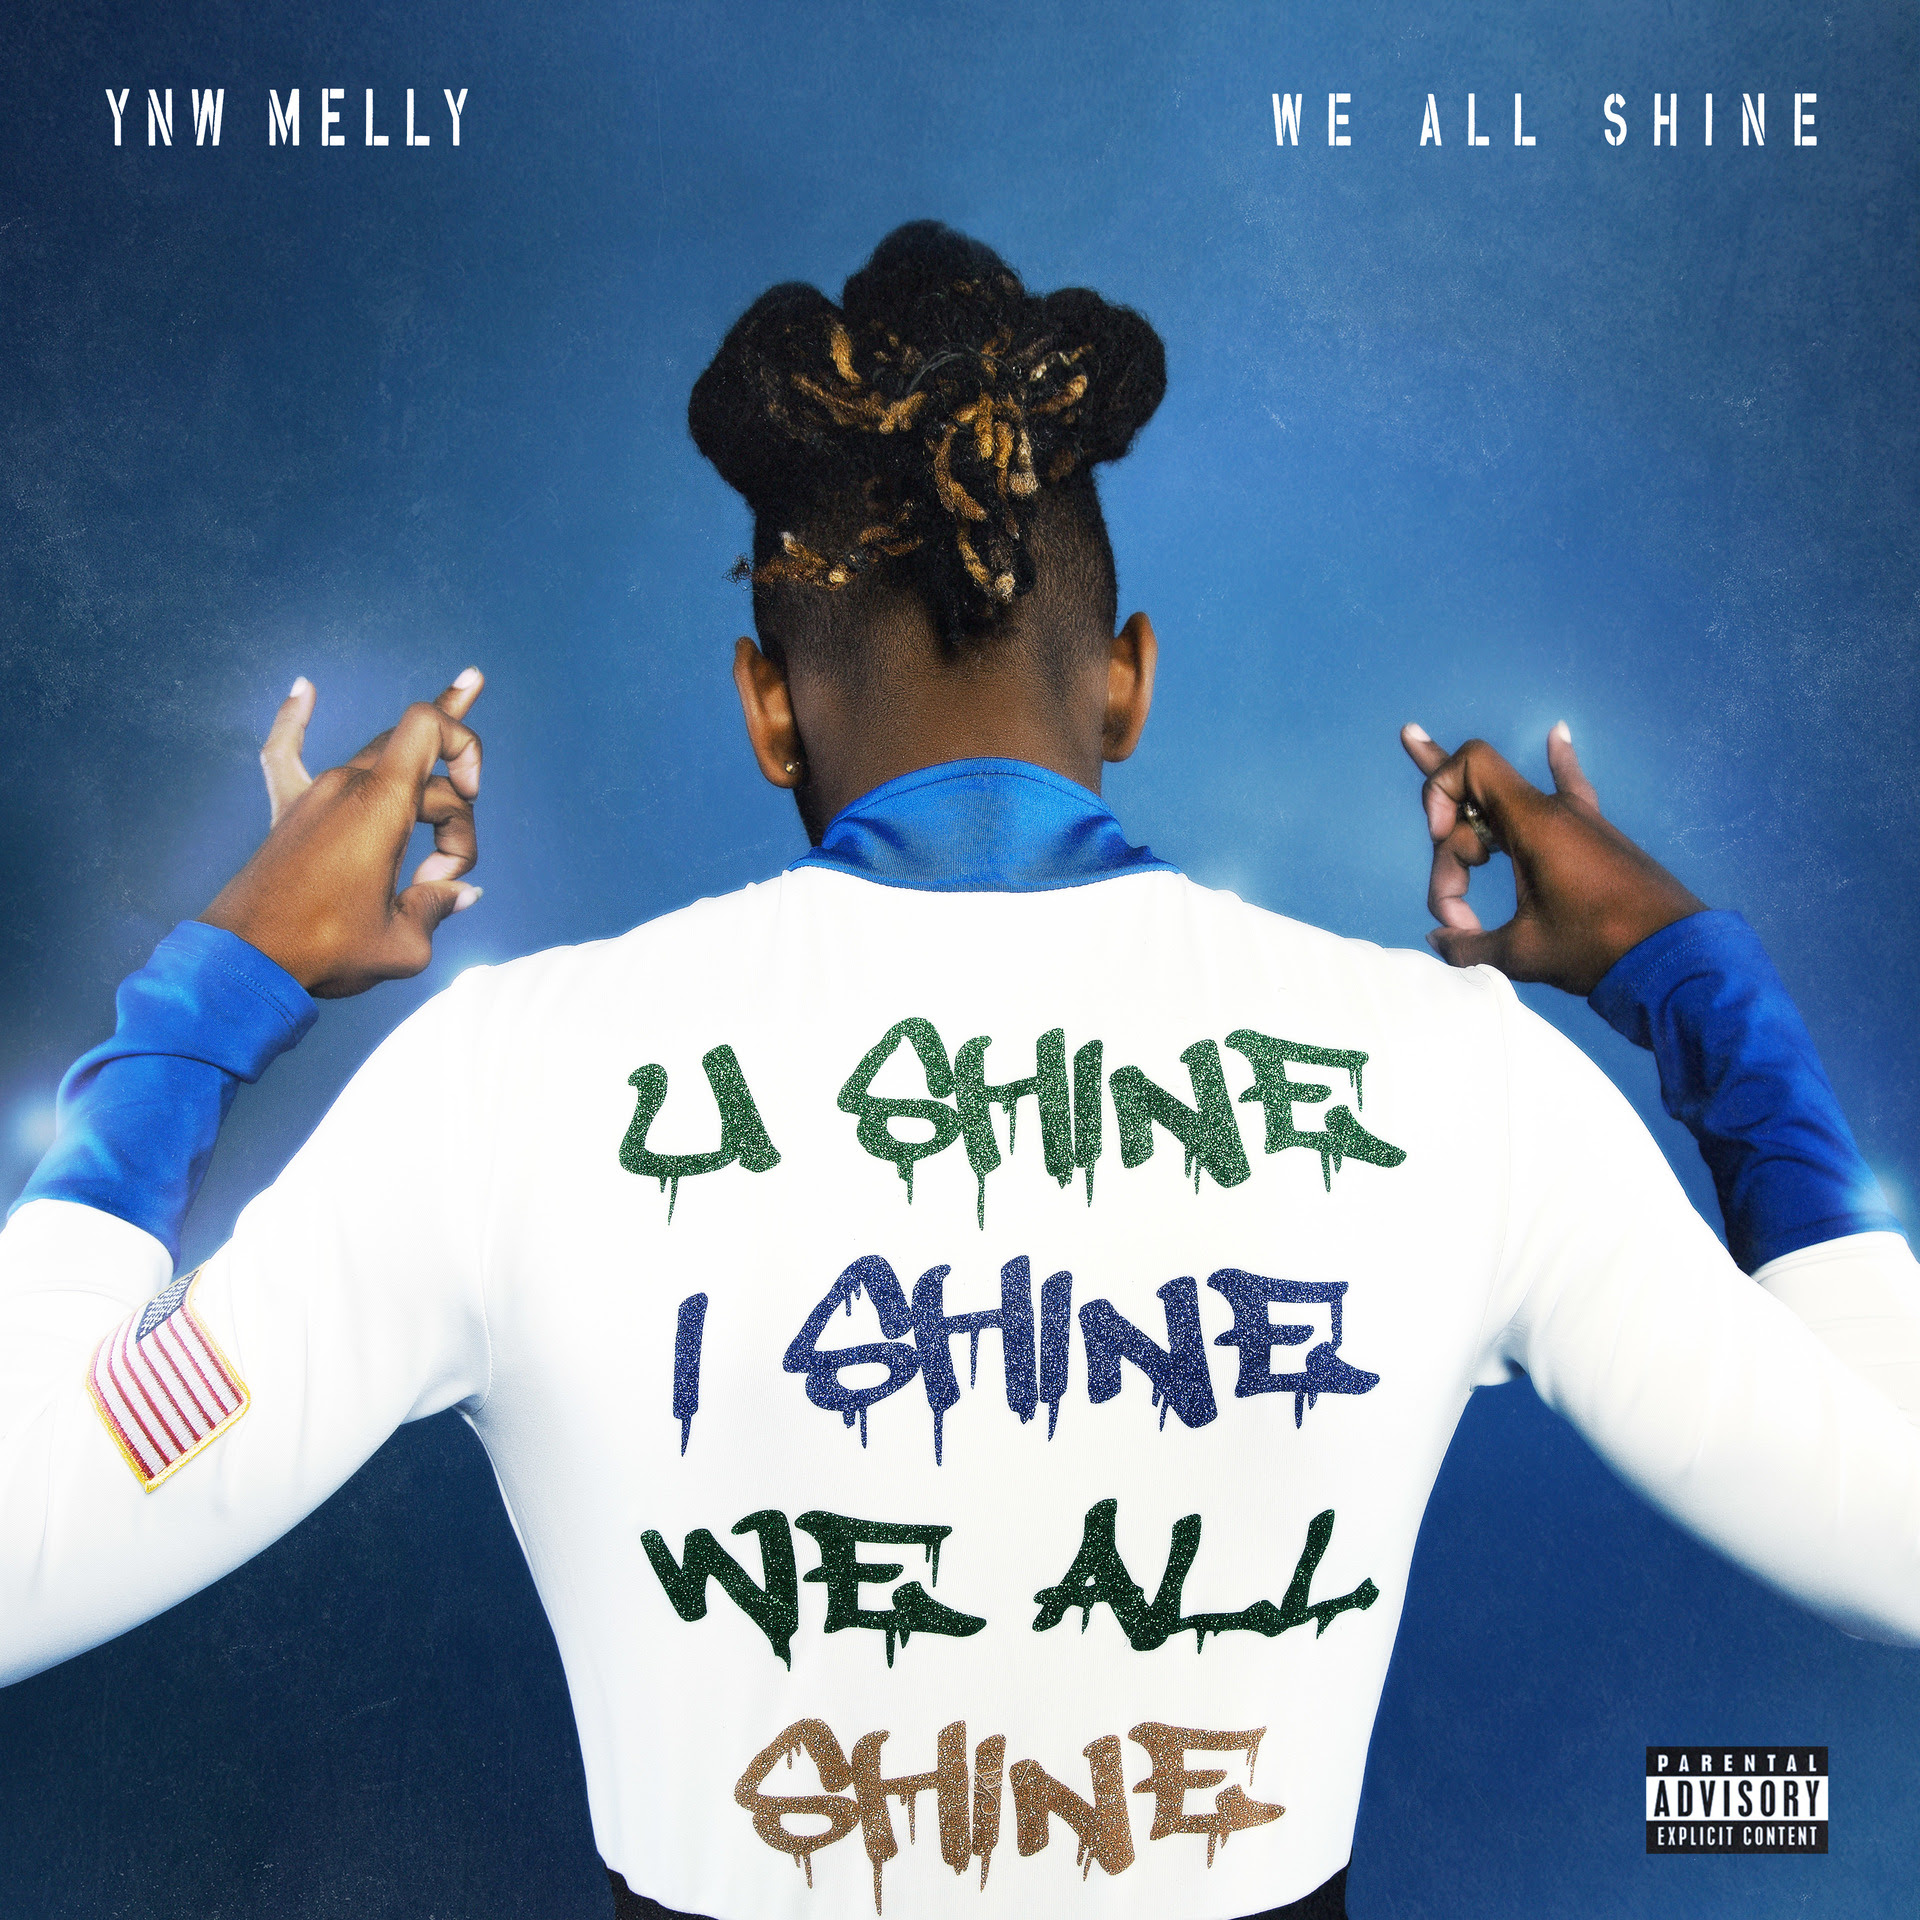 YNW Melly Shares 'WE ALL SHINE' Album Tracklist Feat. Kanye West & More | HipHop-N-More